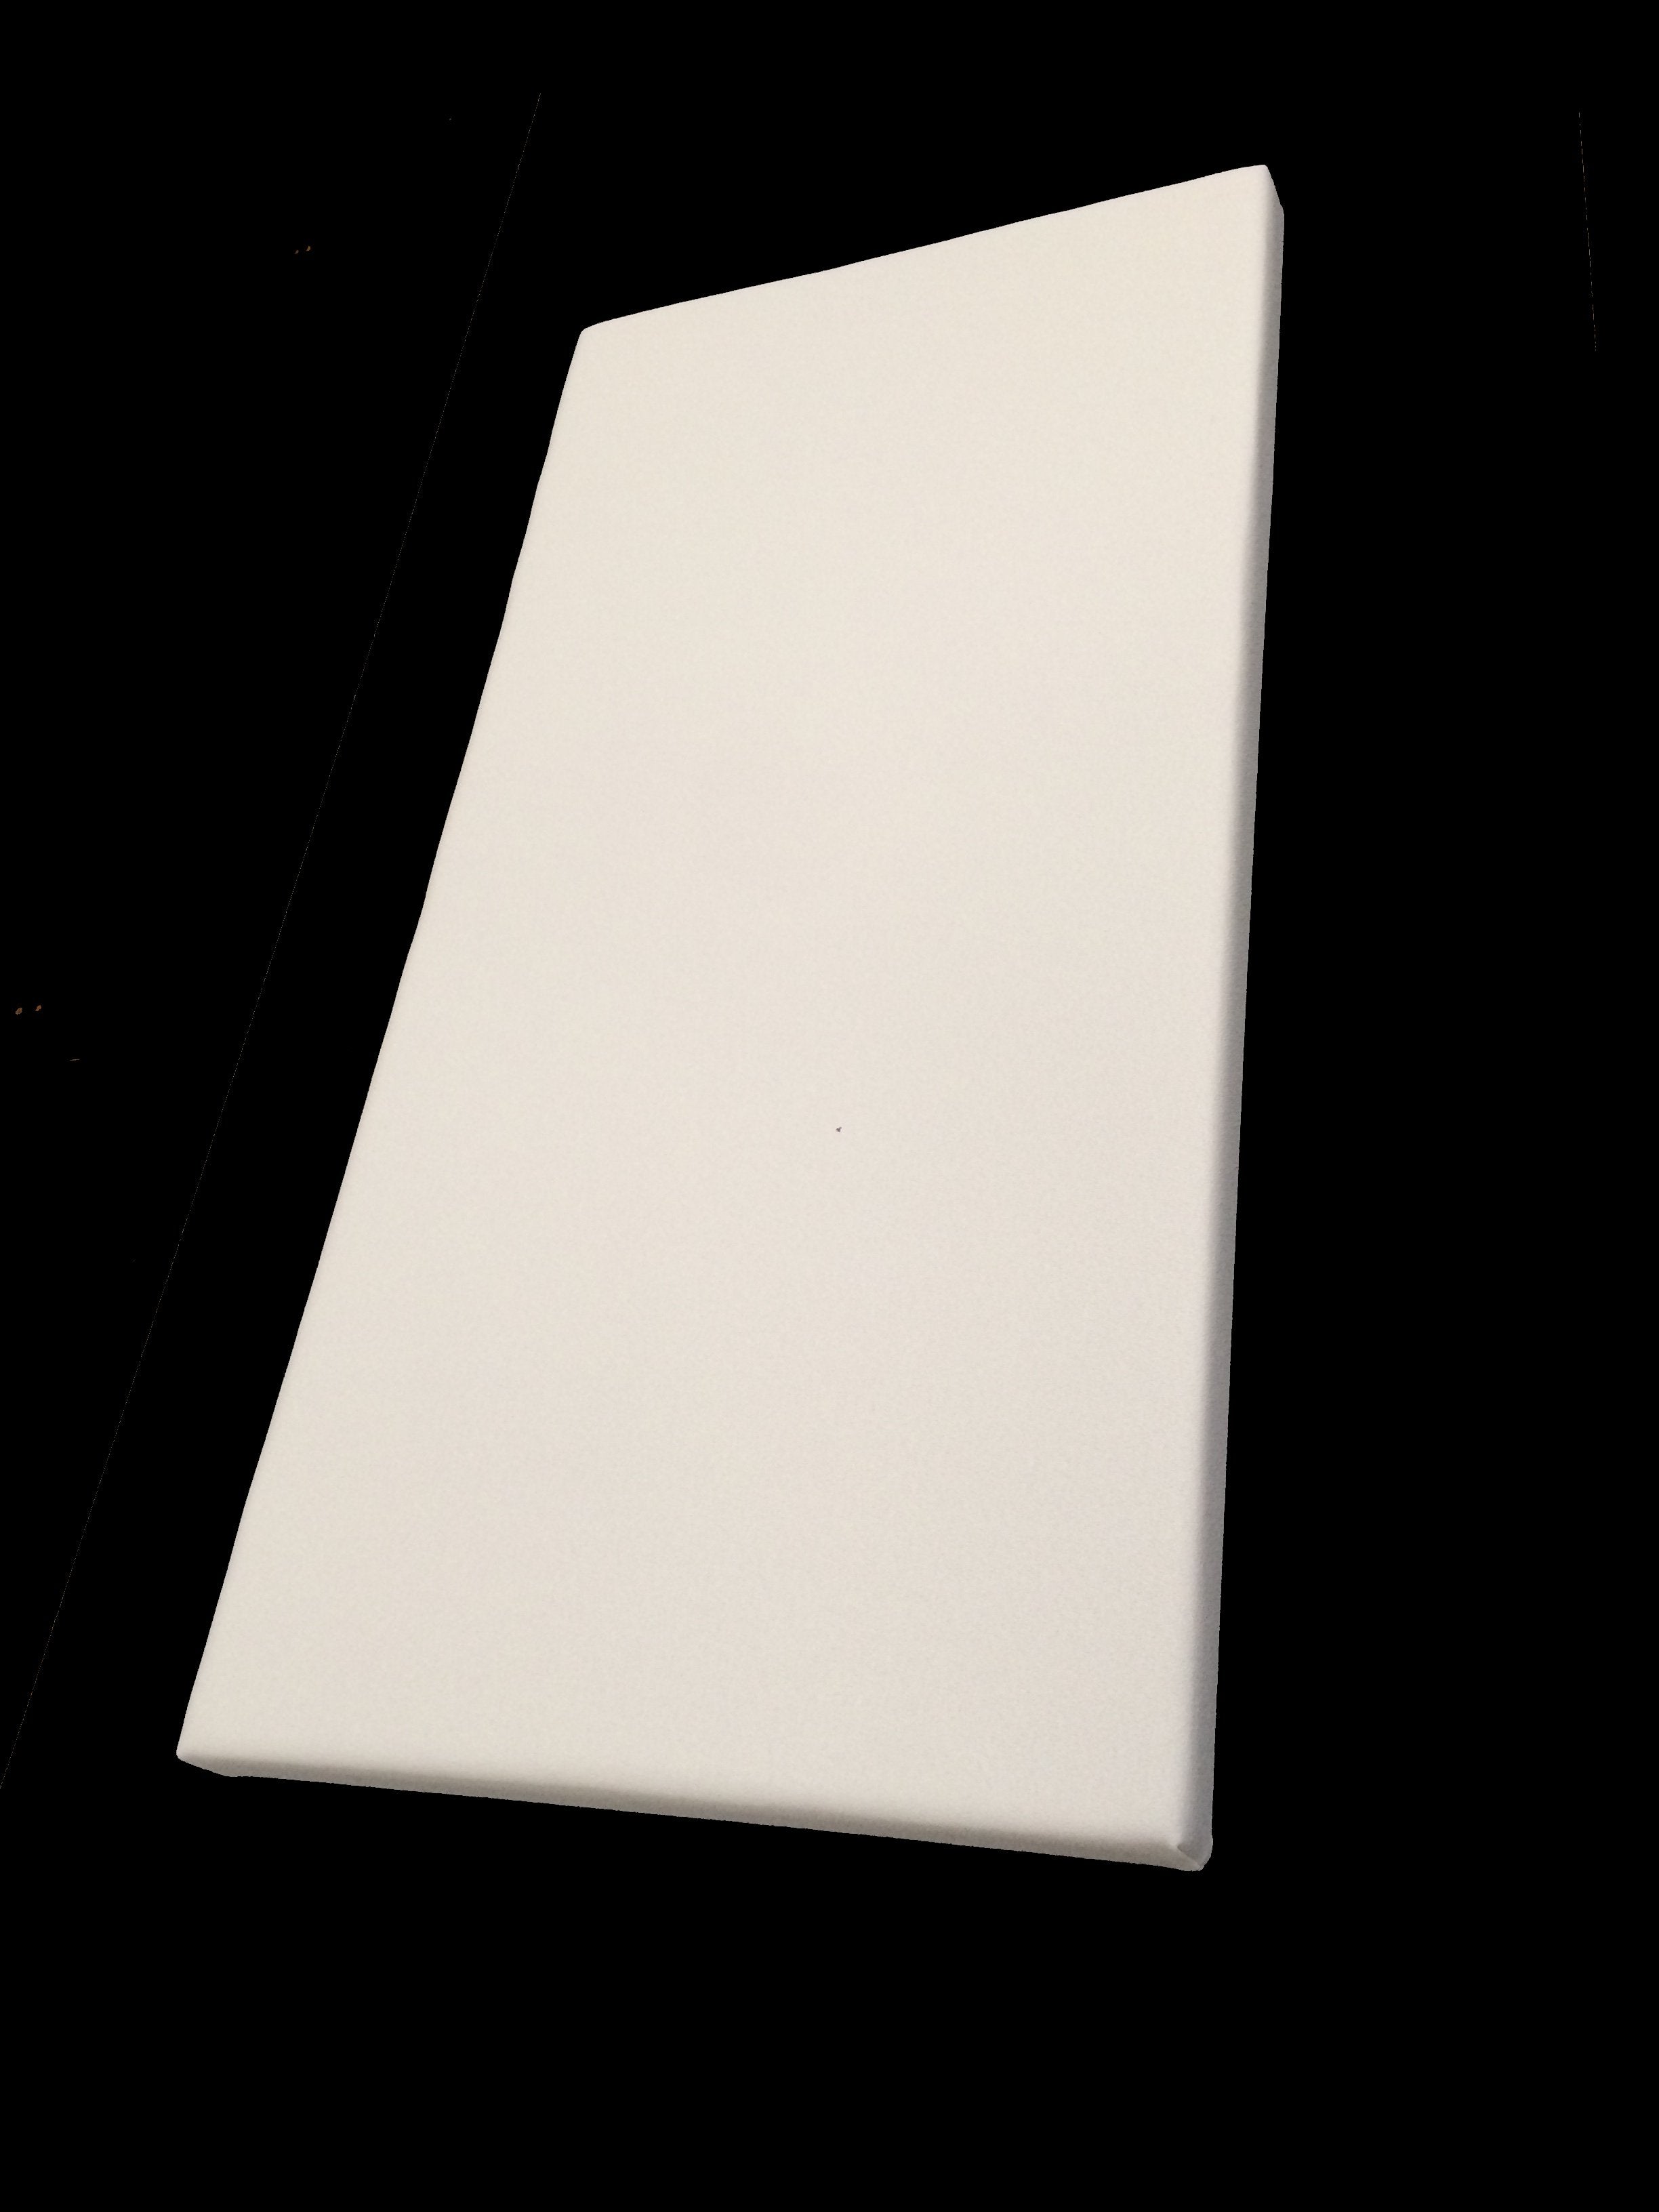 2" SoundControl Ceiling Mounted Acoustic Panel 2ft by 4ft - Advanced Acoustics